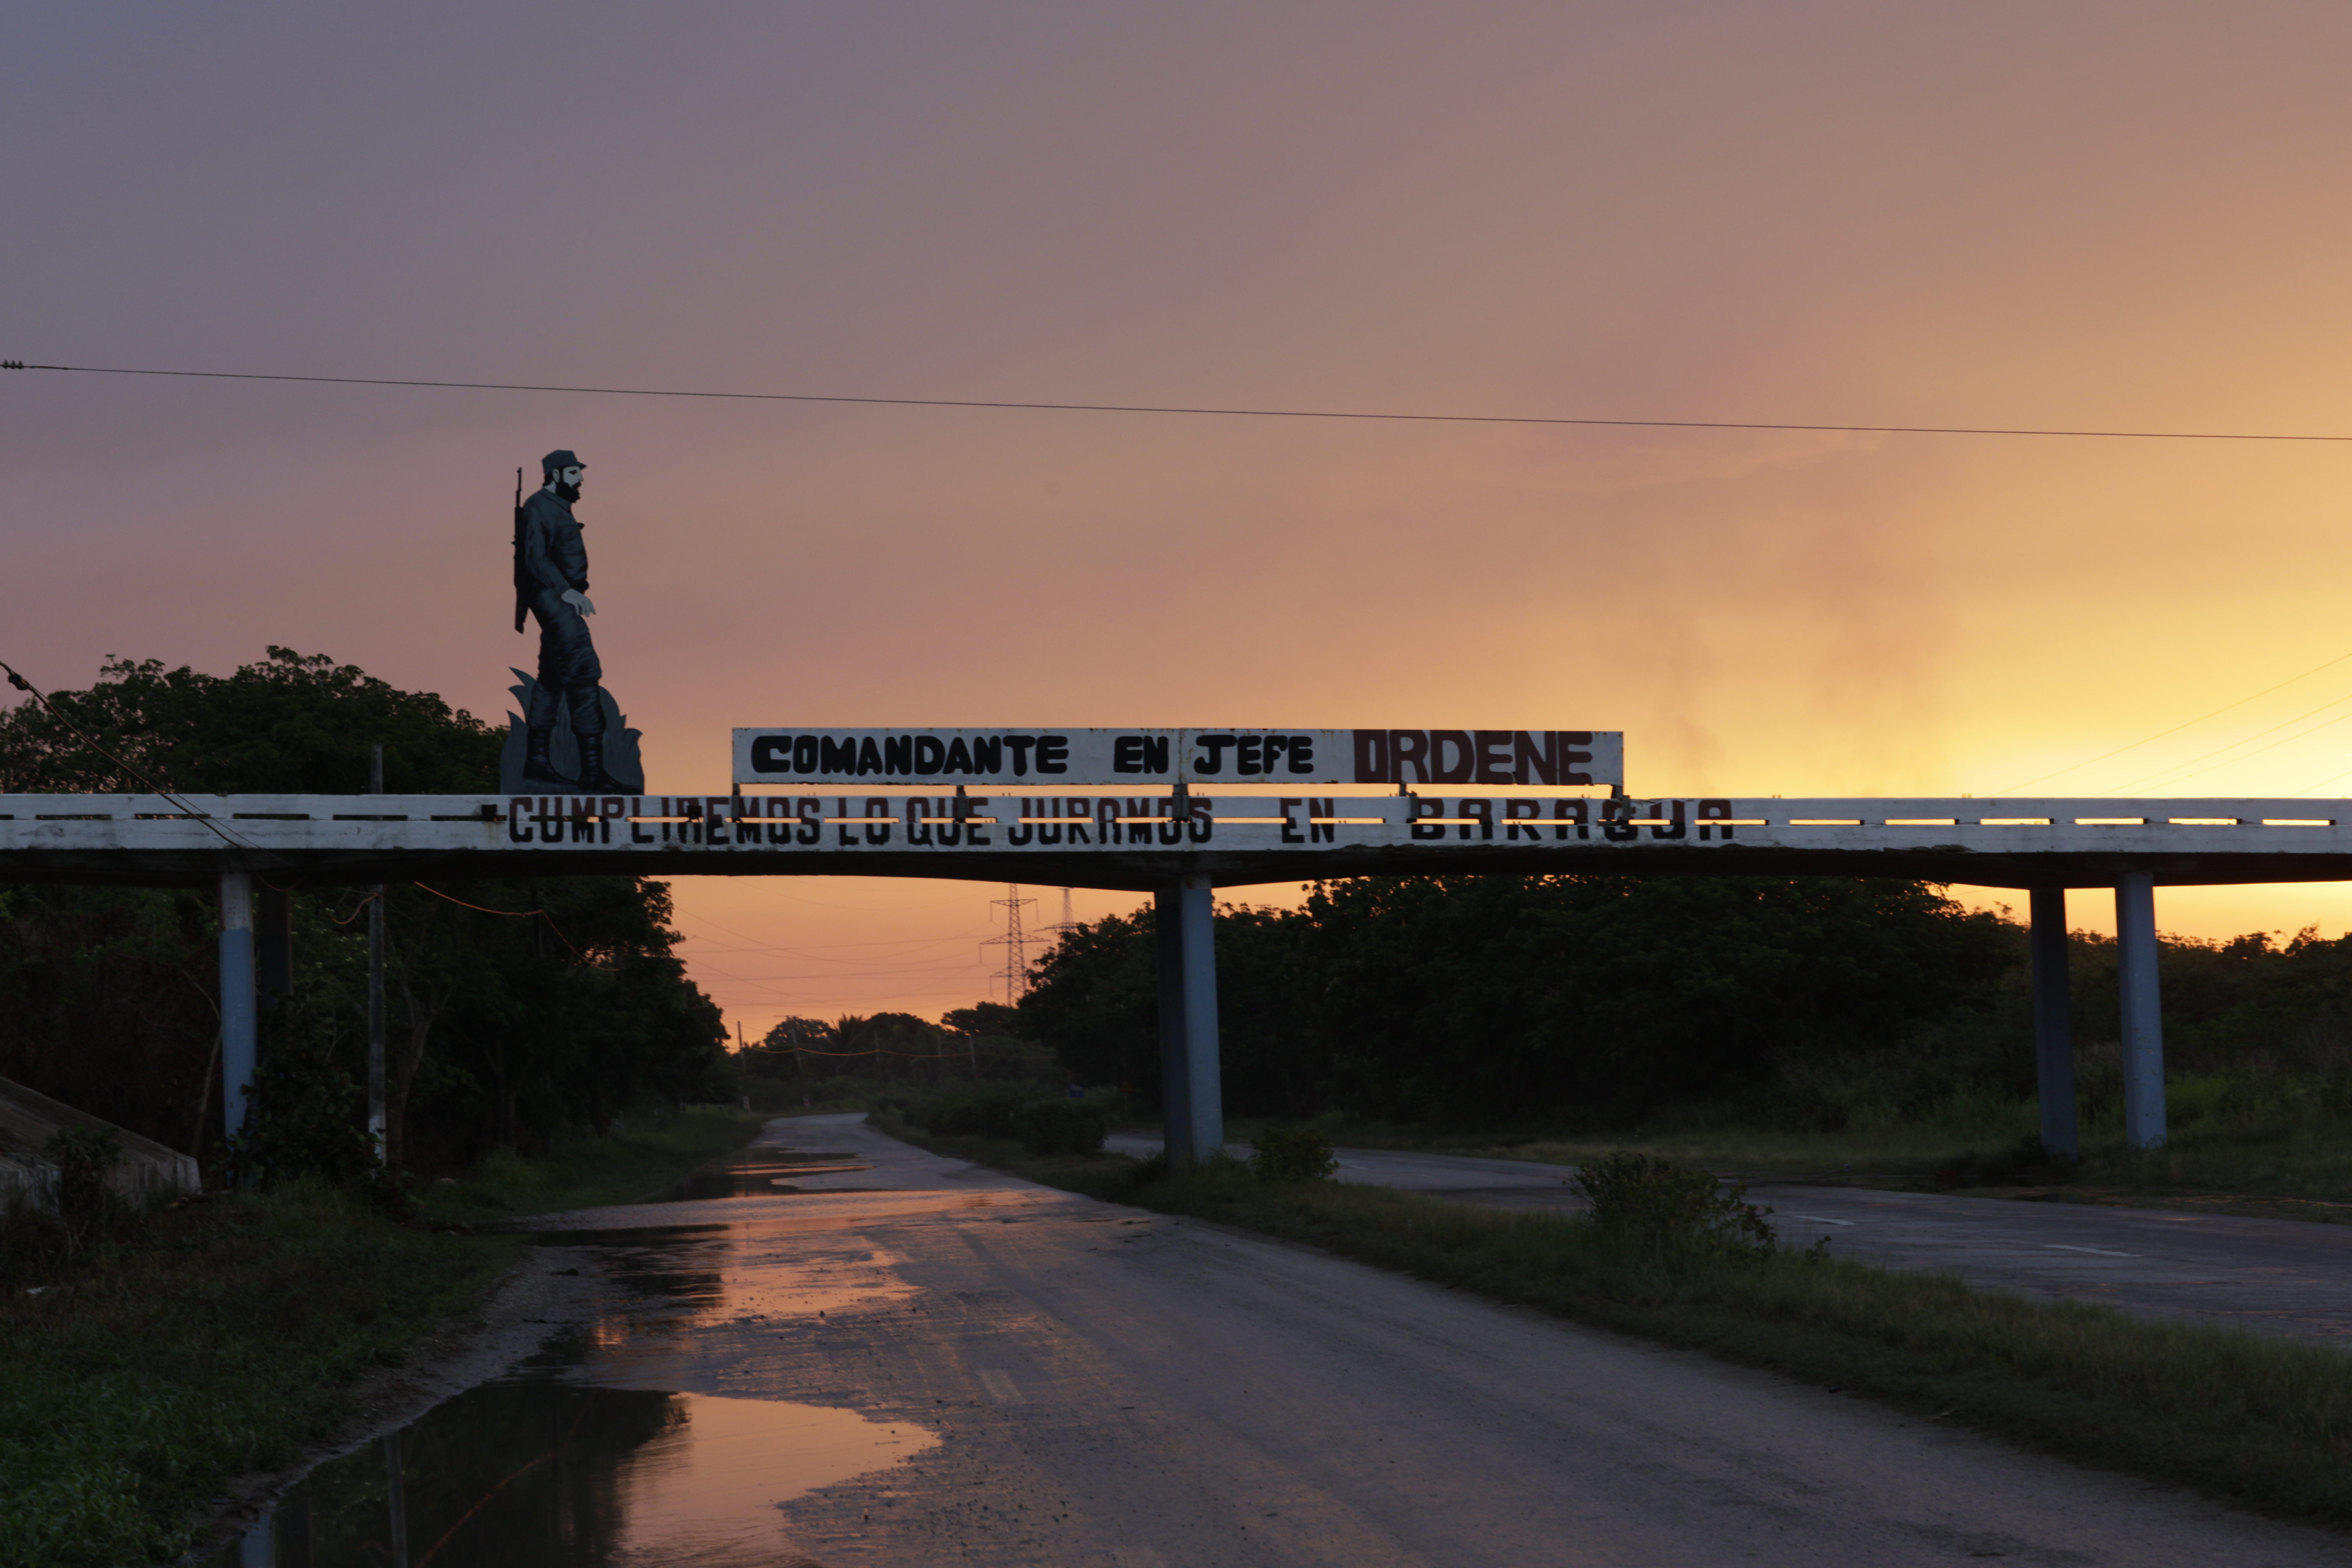 Propaganda outside Mariel, a new base for private investment. The sign reads, “By order of the commander in chief, we fulfill our promise at Baragua.” It refers to a 19th-century Cuban rebellion against colonial Spain.
